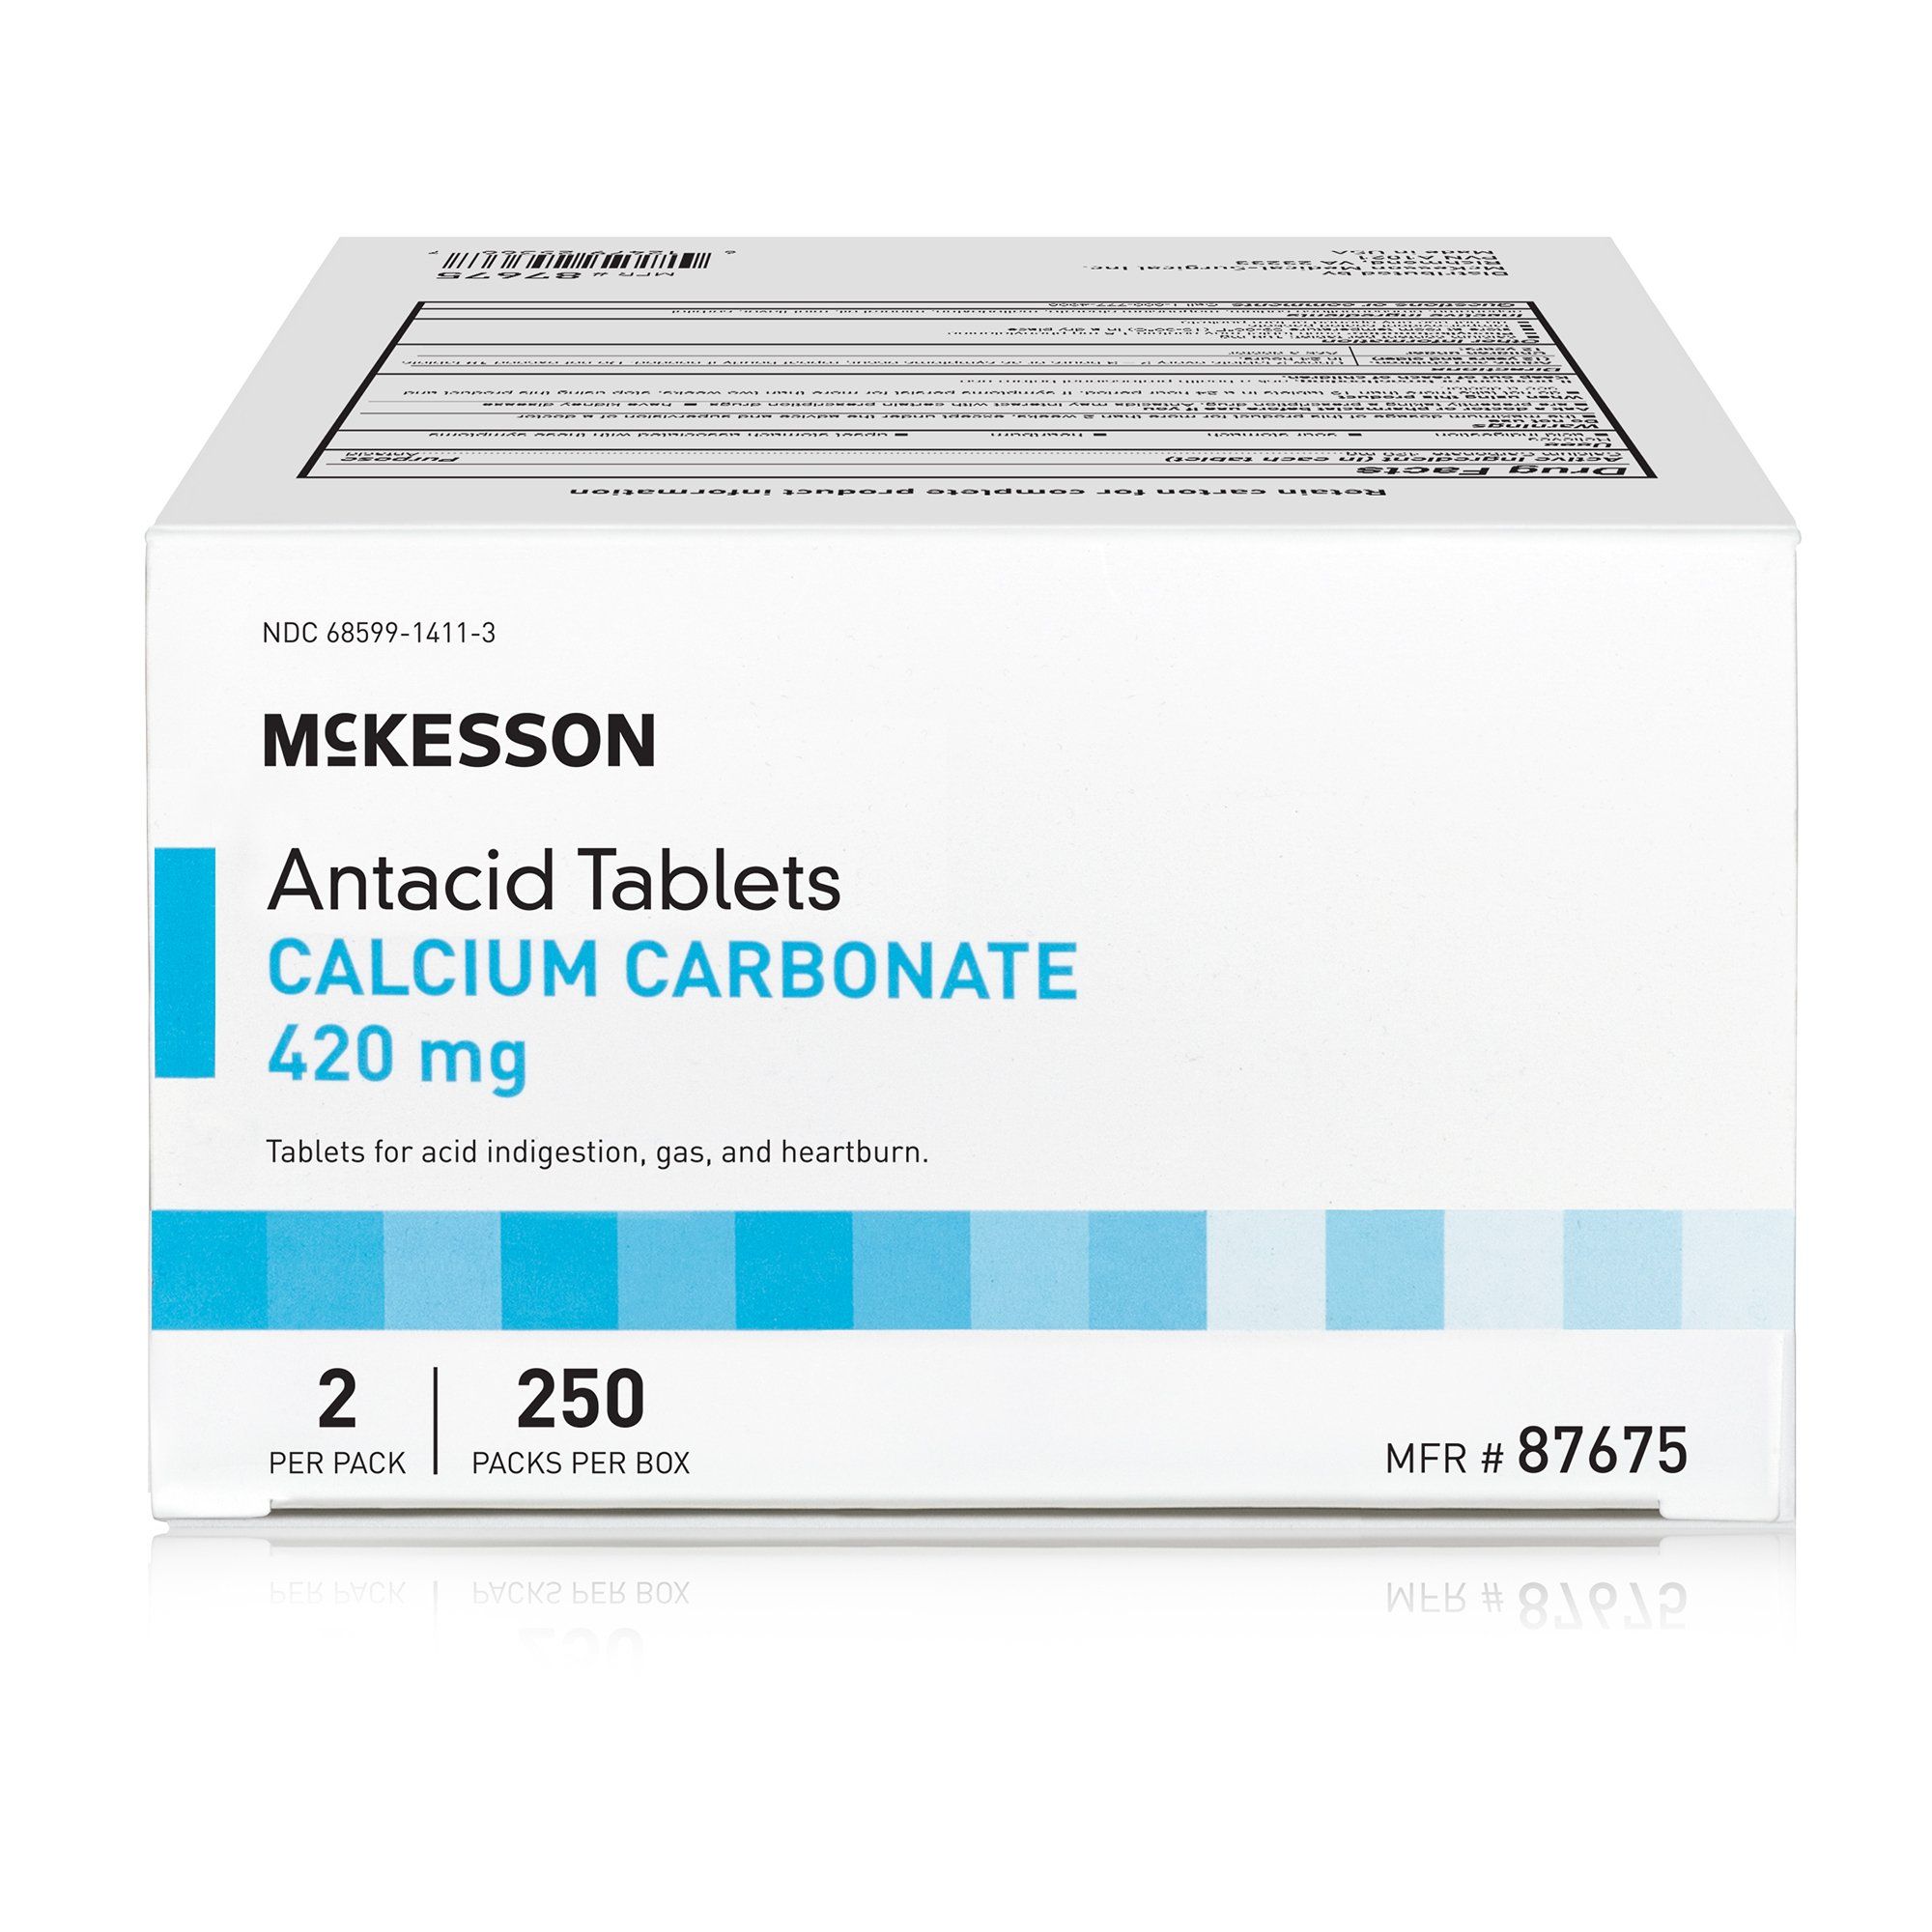 McKesson Antacid Tablets, 420 mg - 250 Packets